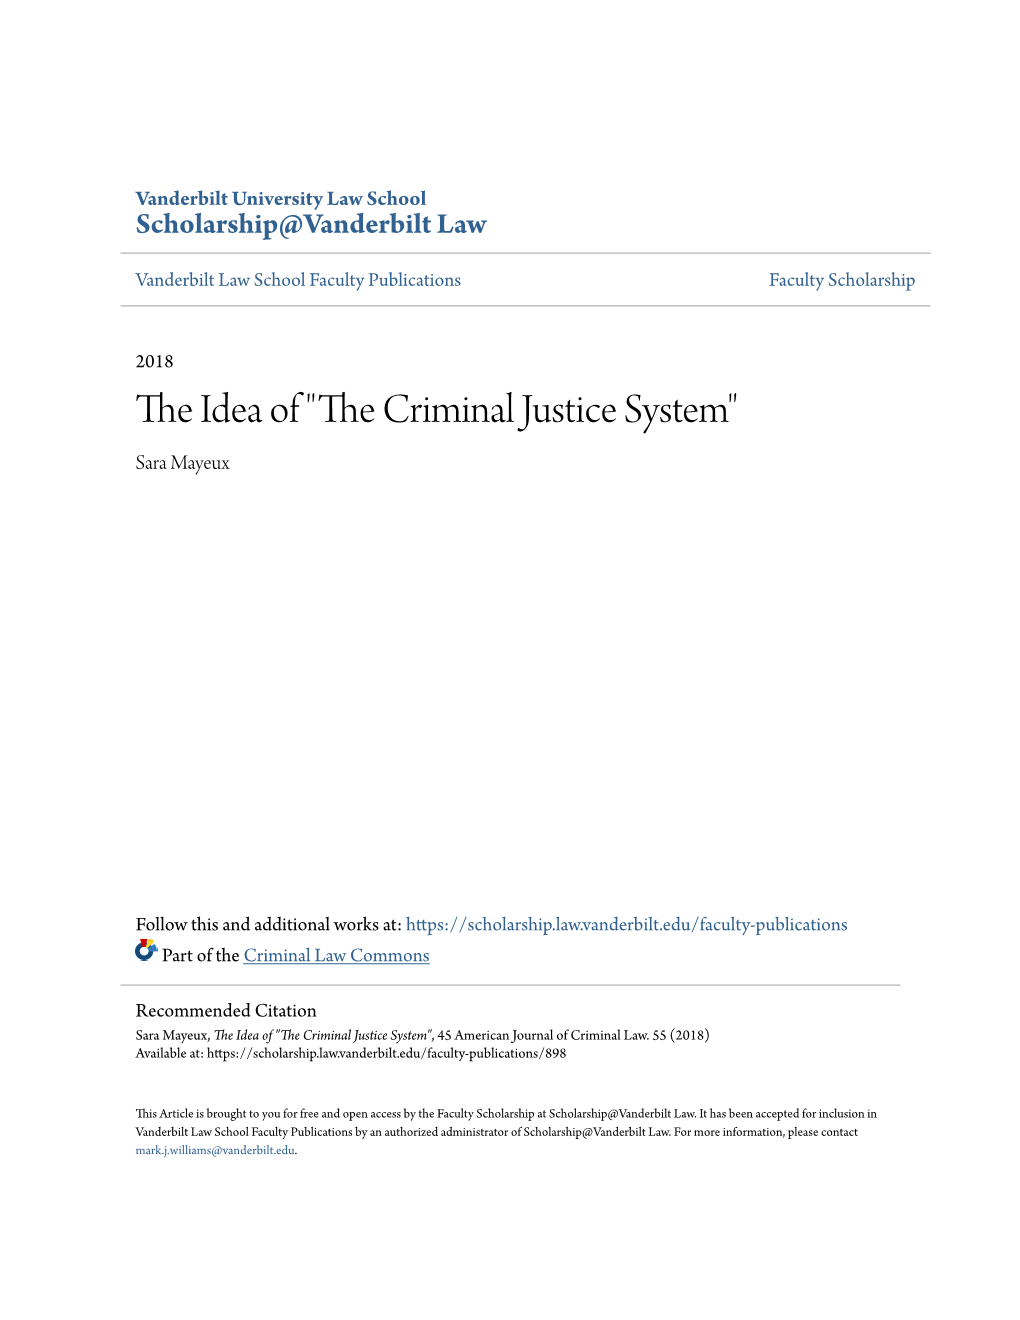 The Idea of "The Criminal Justice System", 45 American Journal of Criminal Law